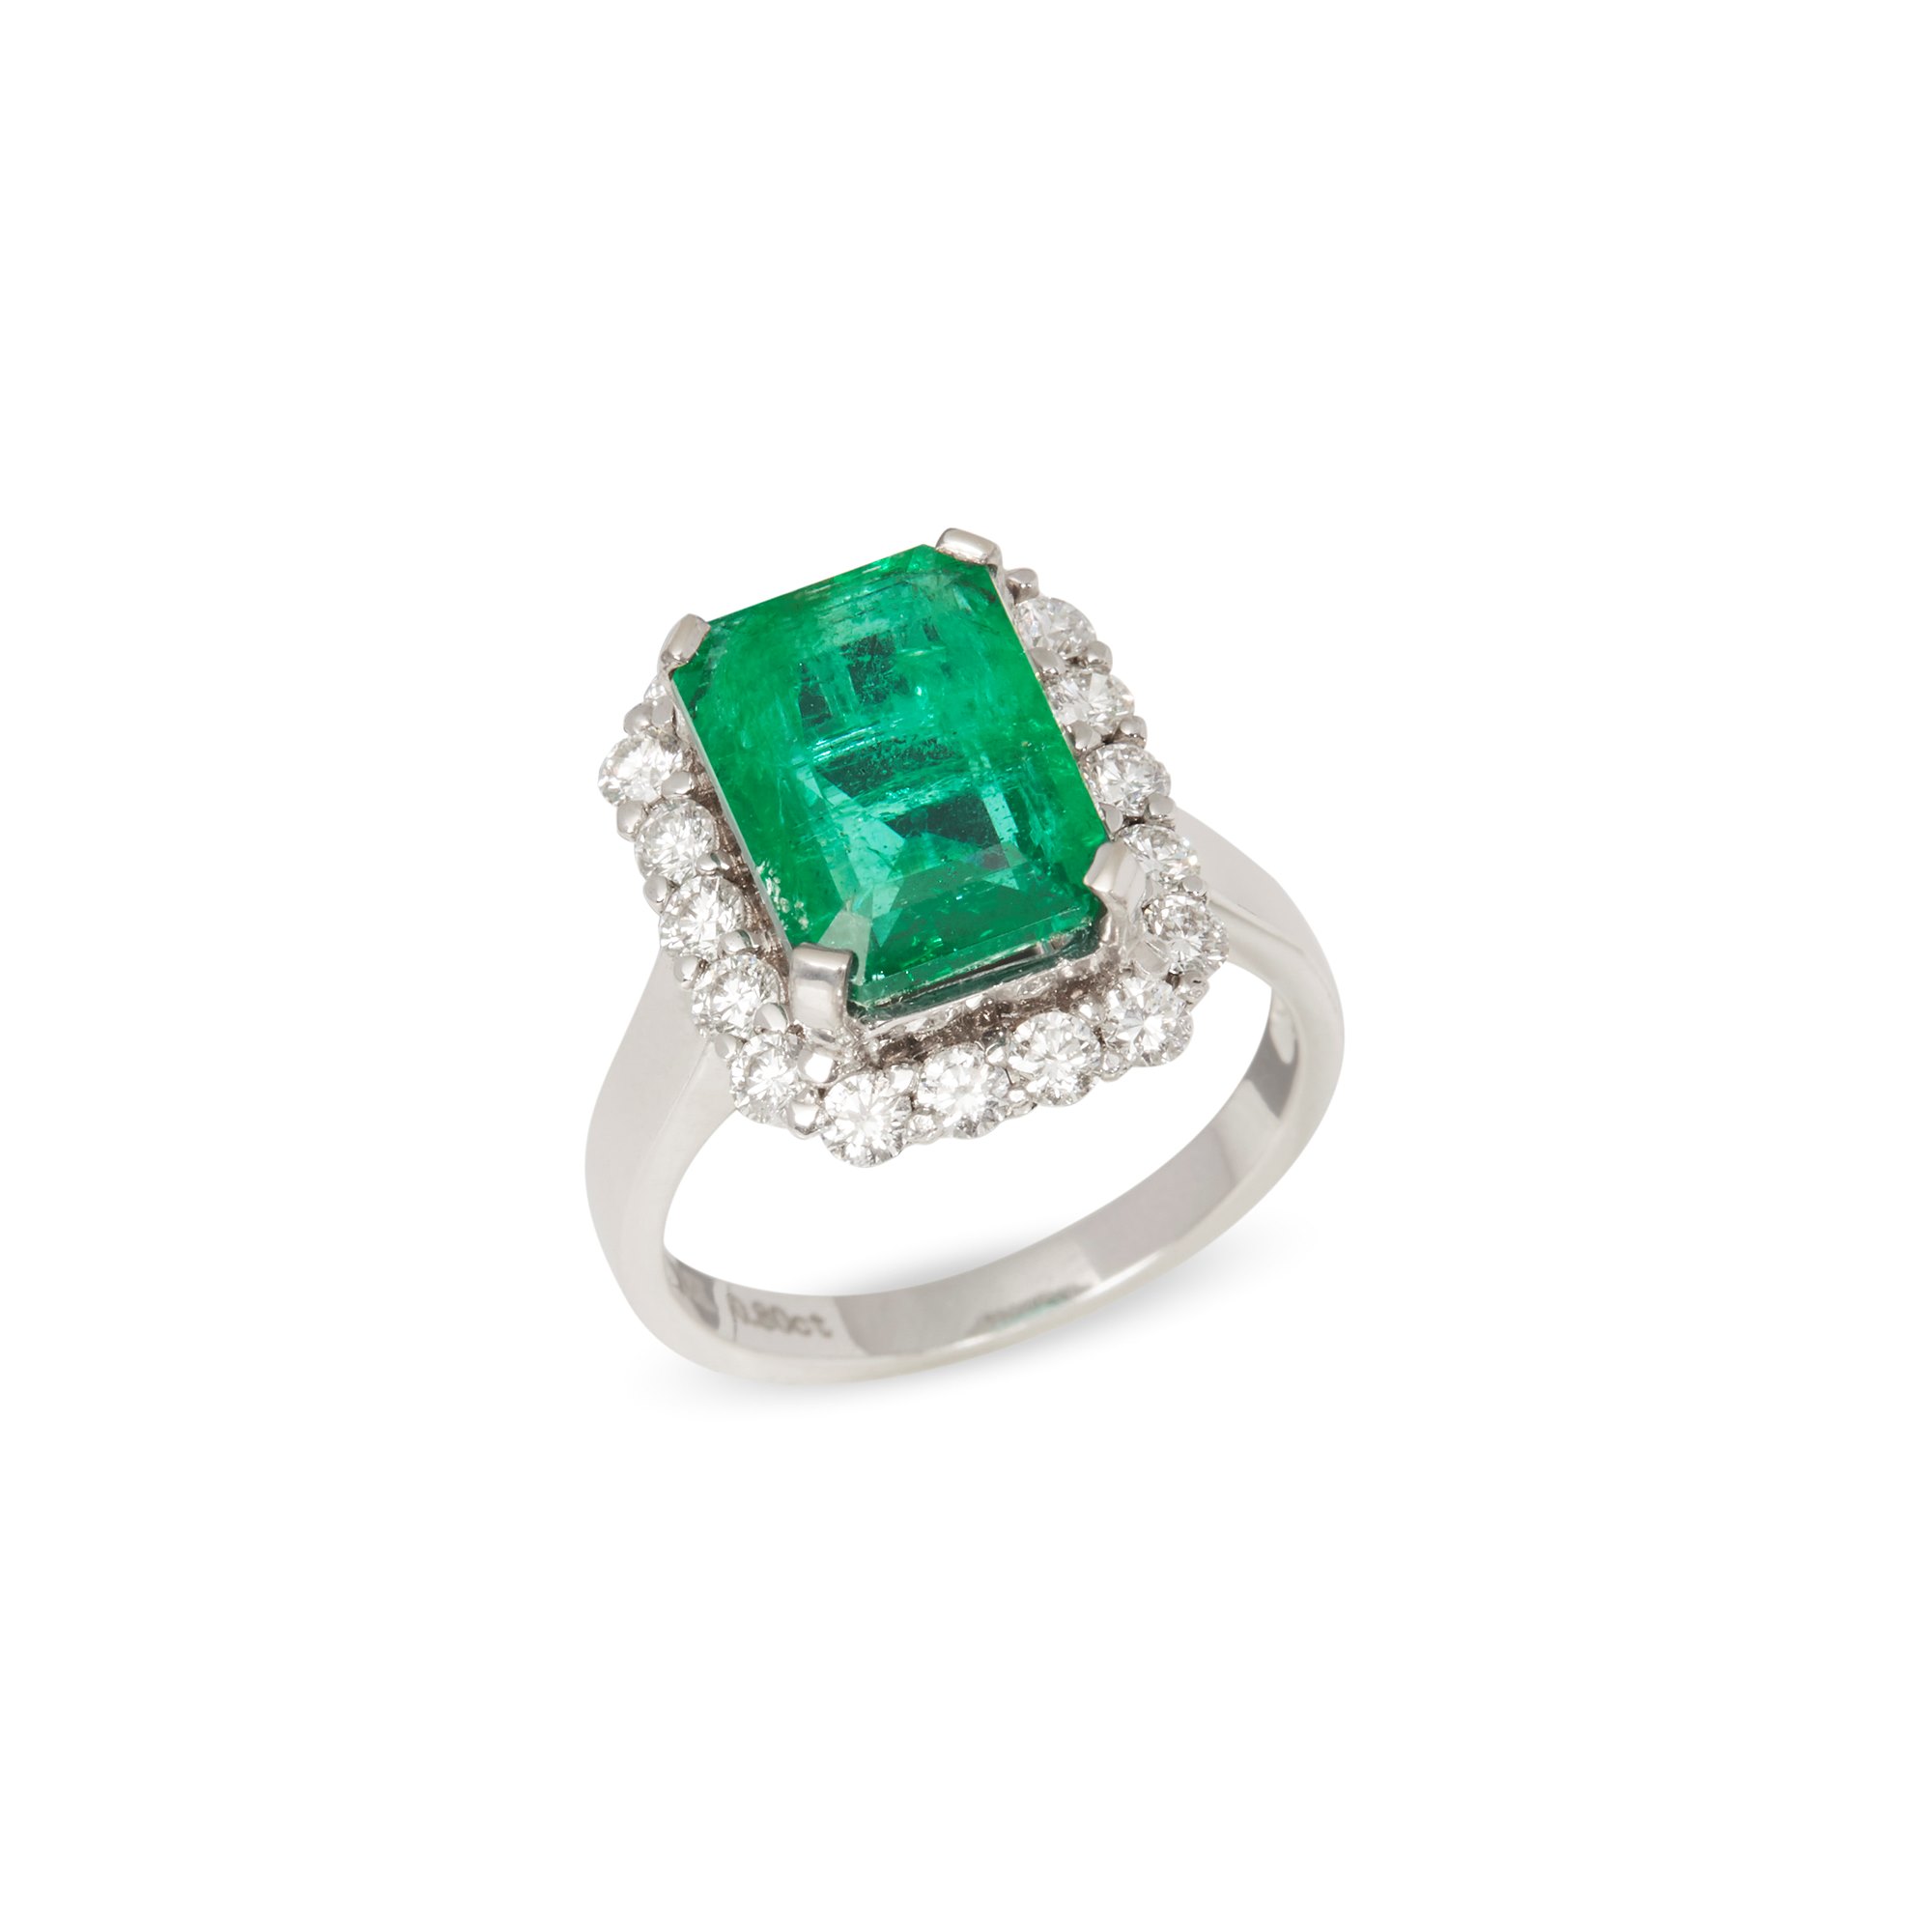 David Jerome Certified 4.58ct Colombian Emerald Cut Emerald and Diamond 18ct gold Ring